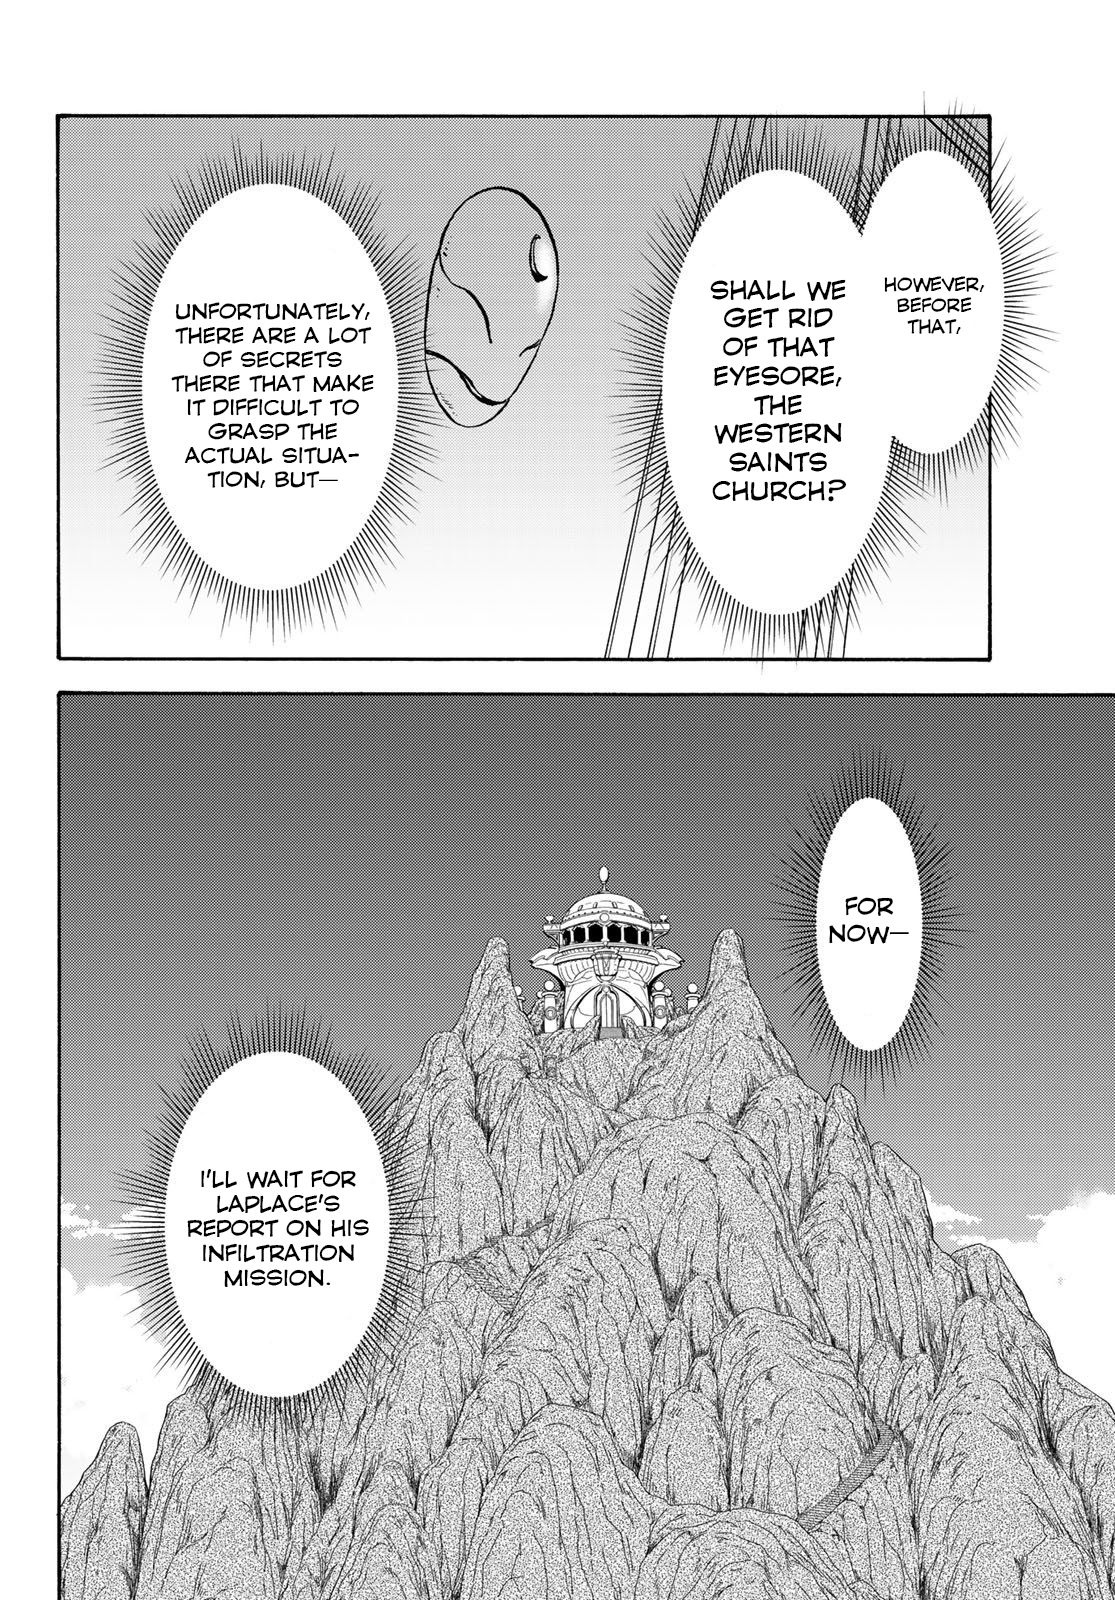 That Time I Got Reincarnated as a Slime, Chapter 72